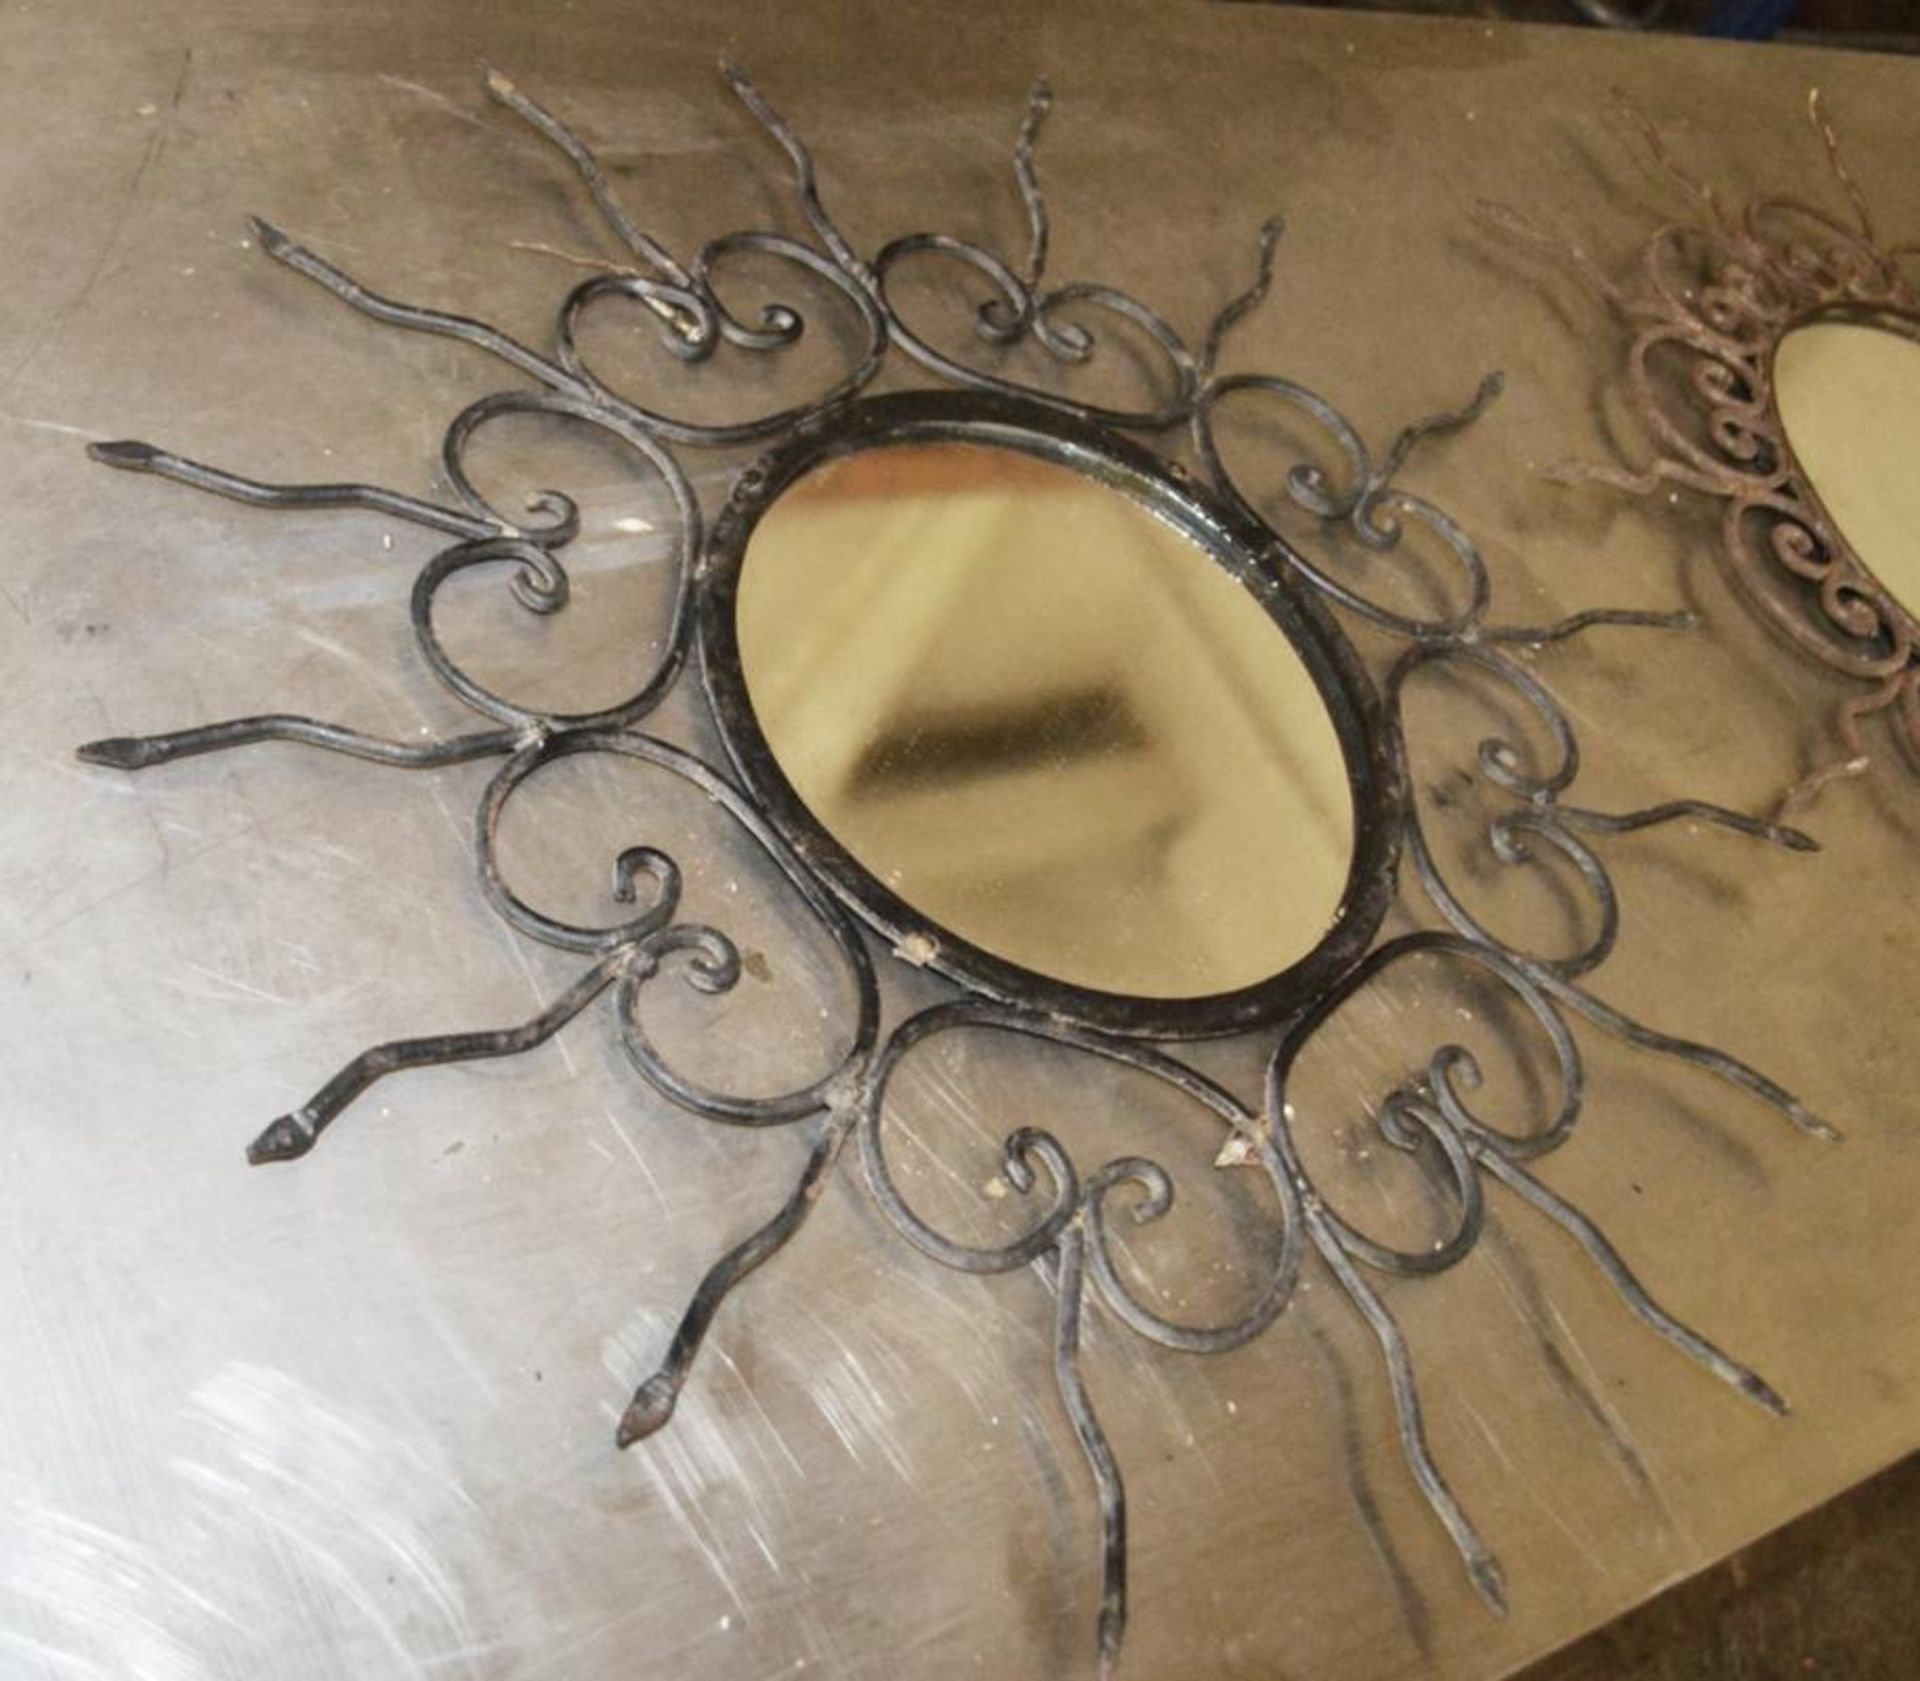 2 x Rustic Handcrafted 'Sun' Mirrors - 60cm Diameter - Recently Taken From A Popular Mexican Restaur